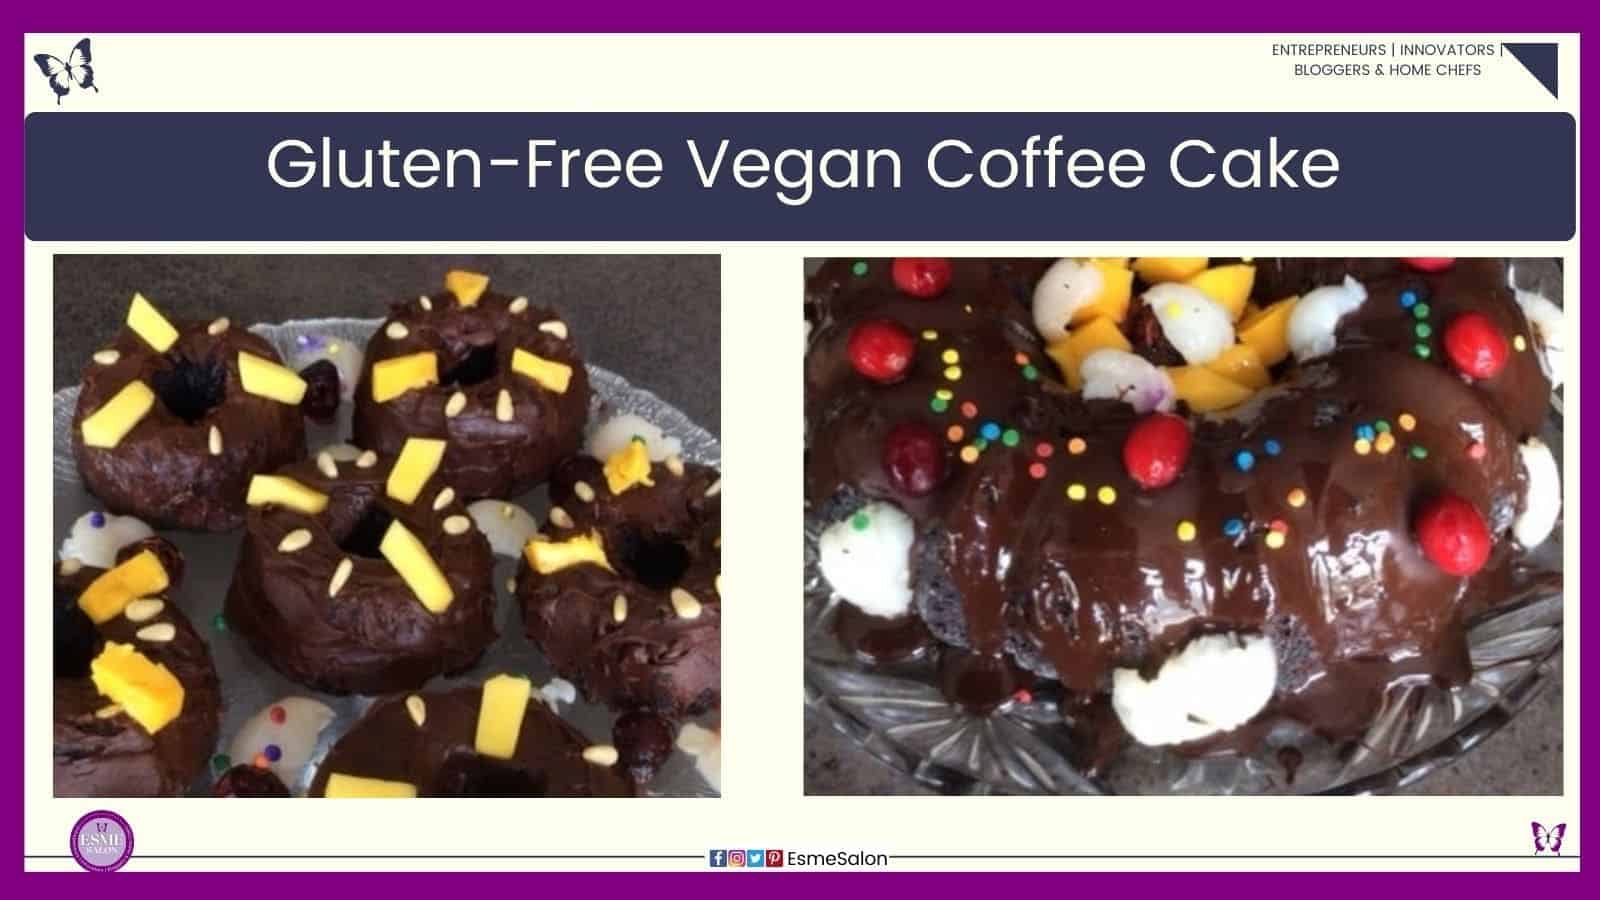 an image of a large and small bundt cake Gluten-Free Vegan Coffee Cake